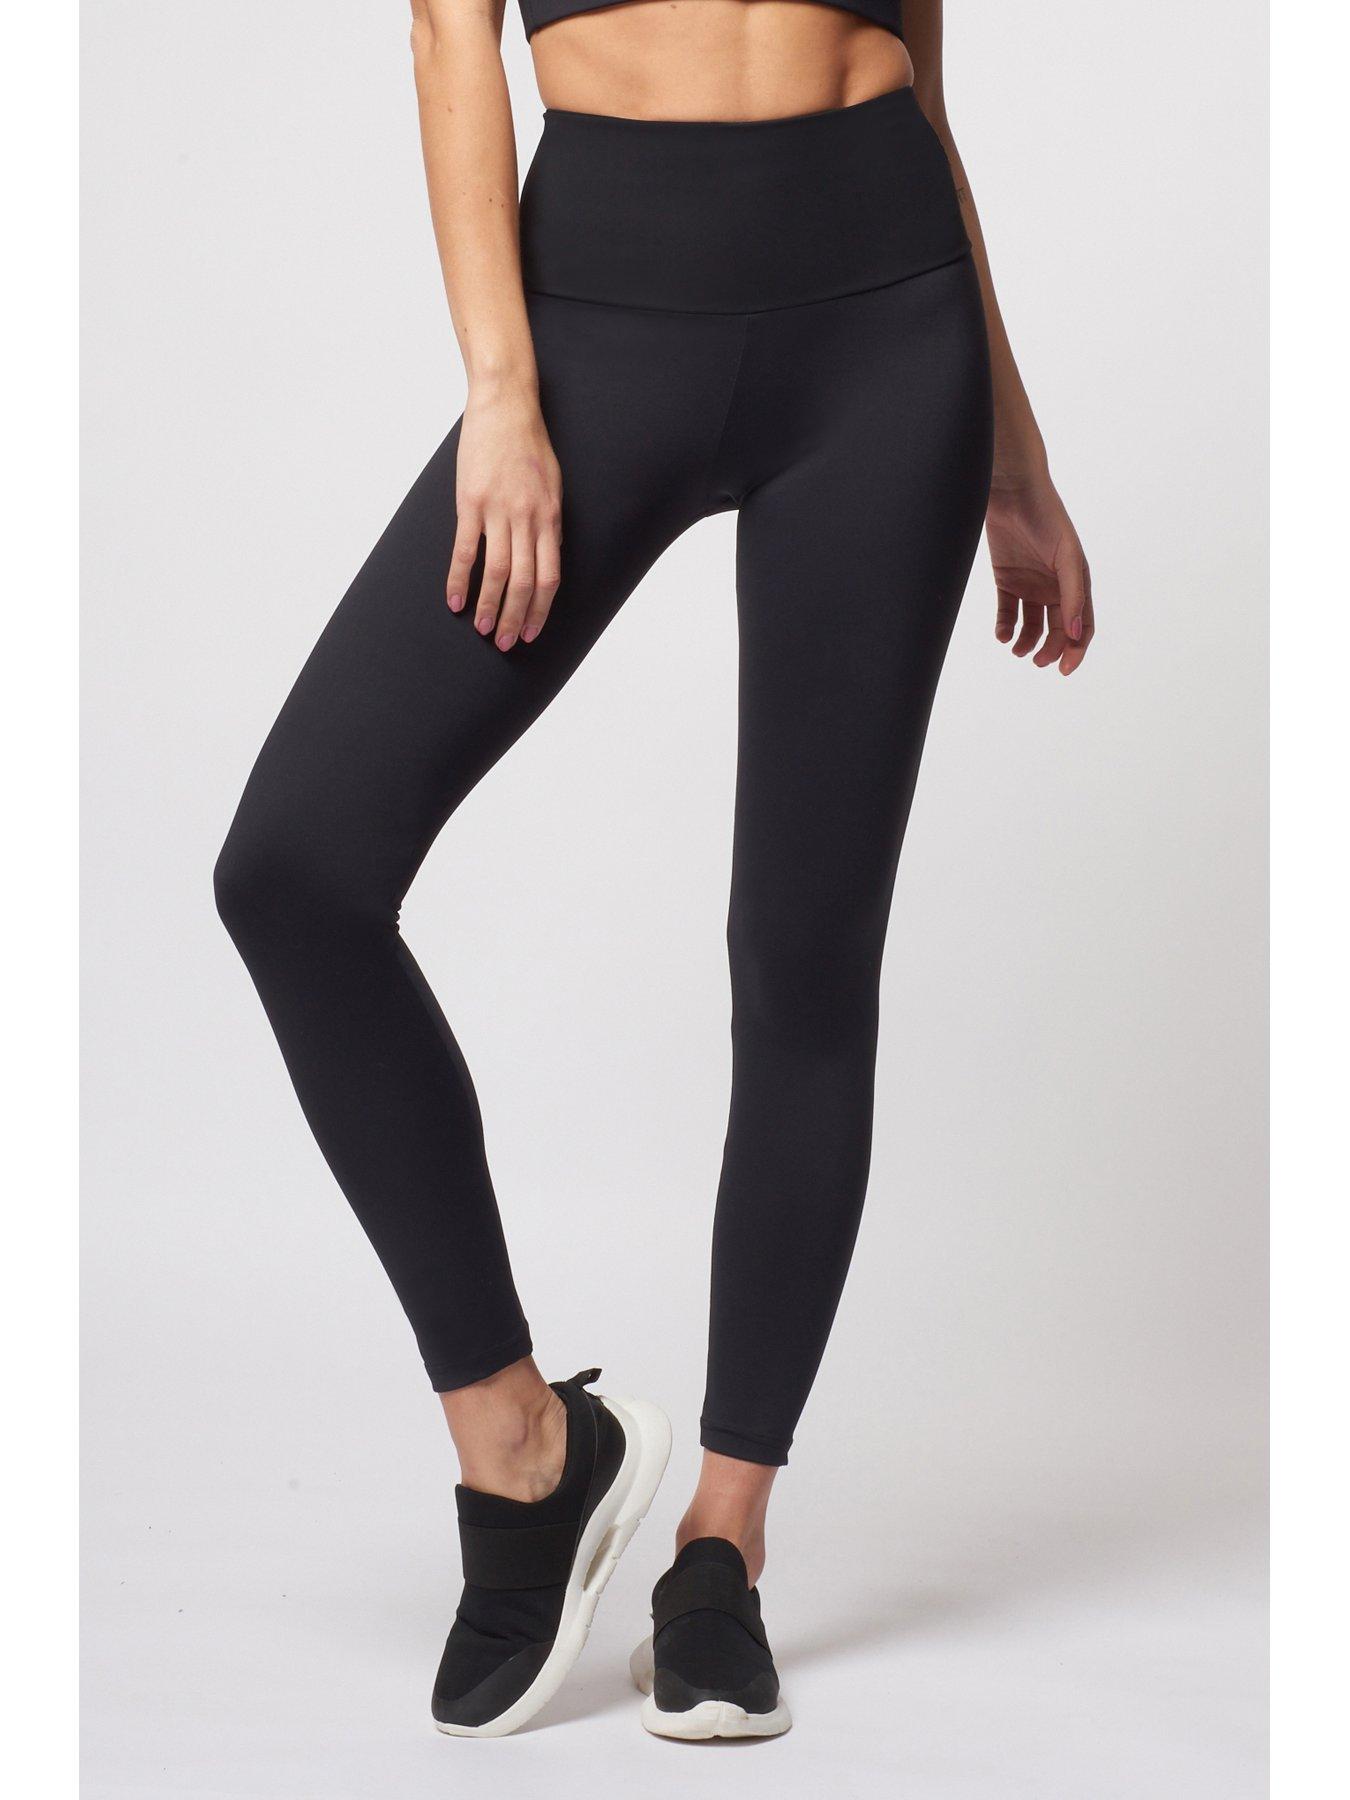 Leggings  Extra Strong Compression Leggings with Standard Tummy